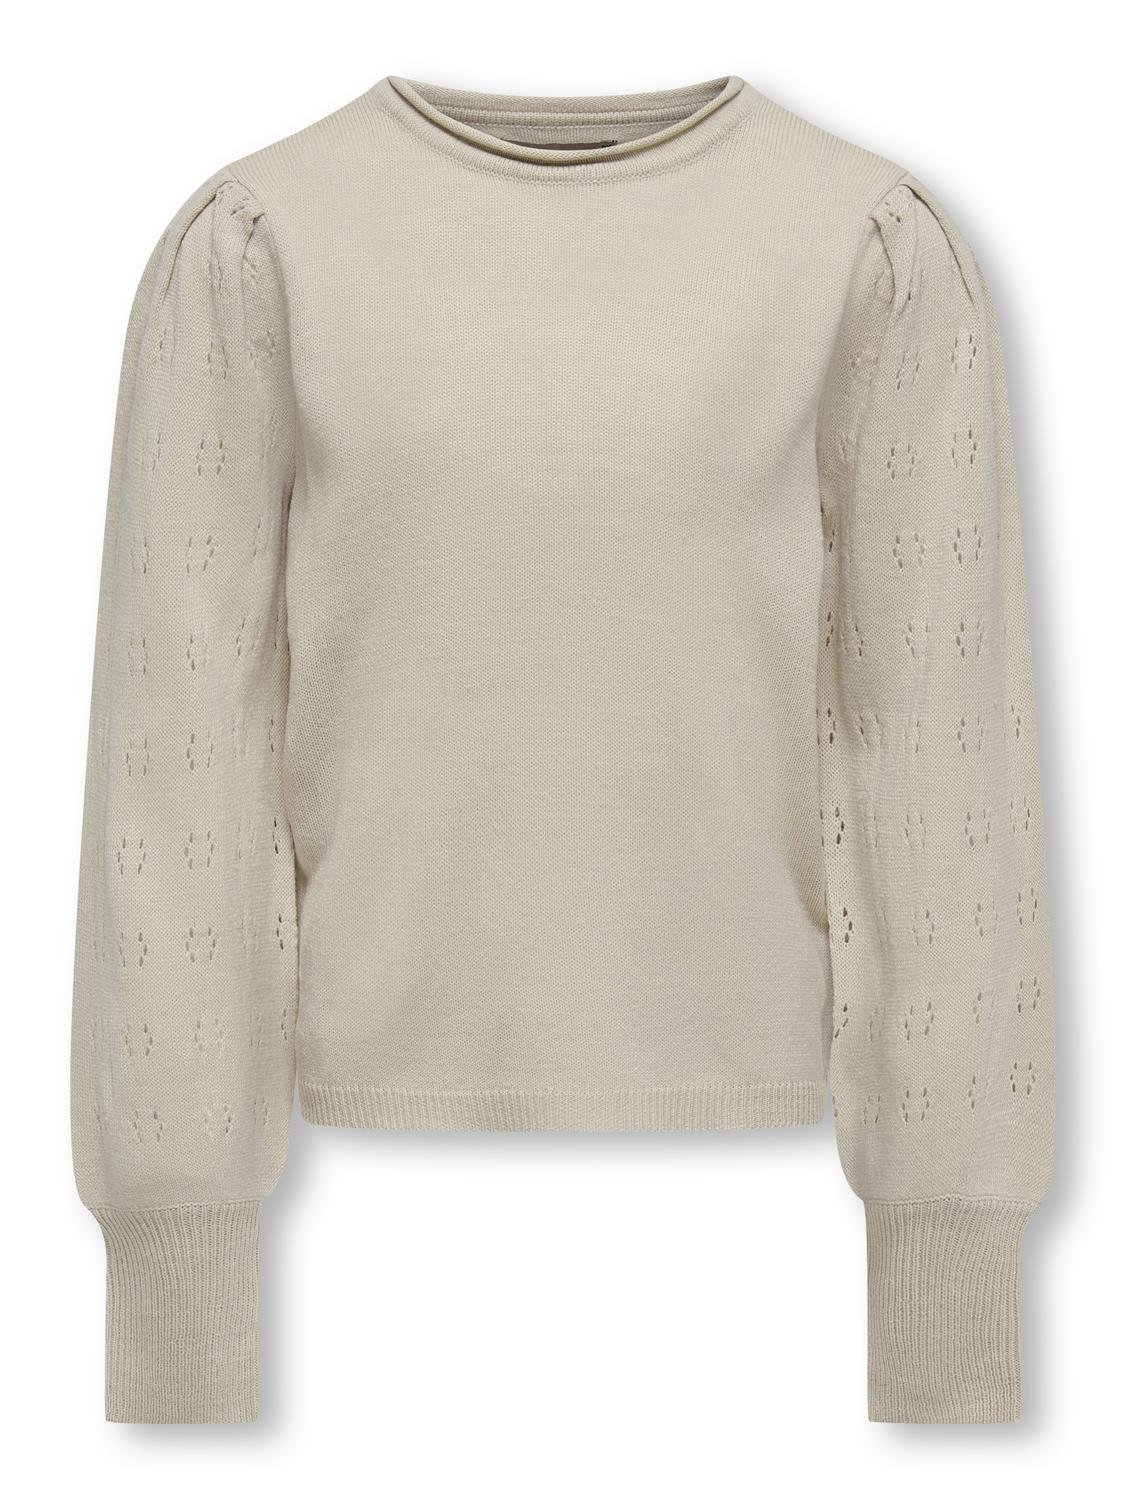 ONLY Puff sleeve Knitted Pullover -Pumice Stone - 15287665